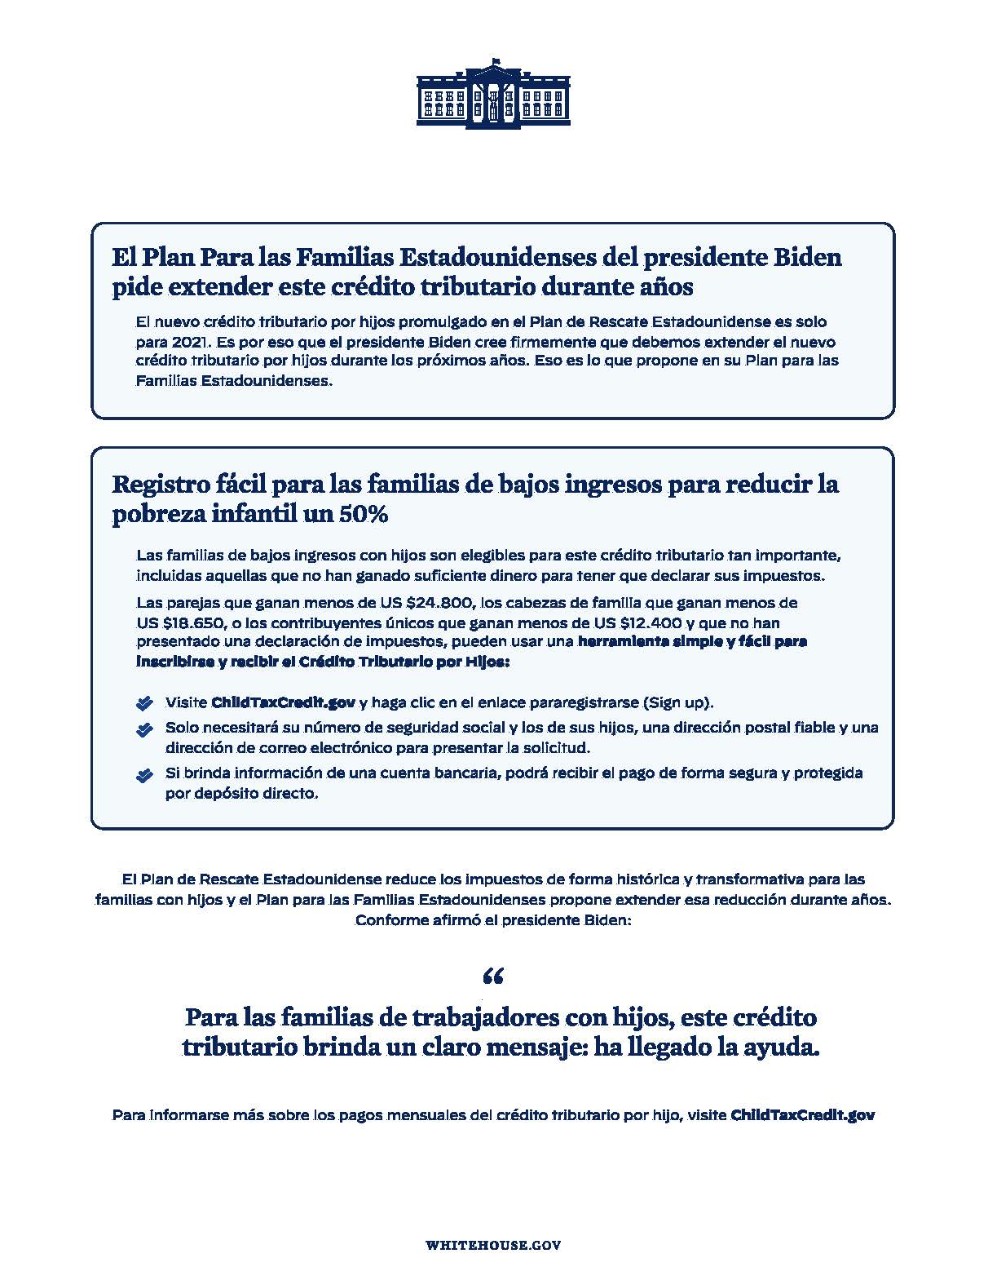 Child Tax Credit One Pager Spanish_Page_2